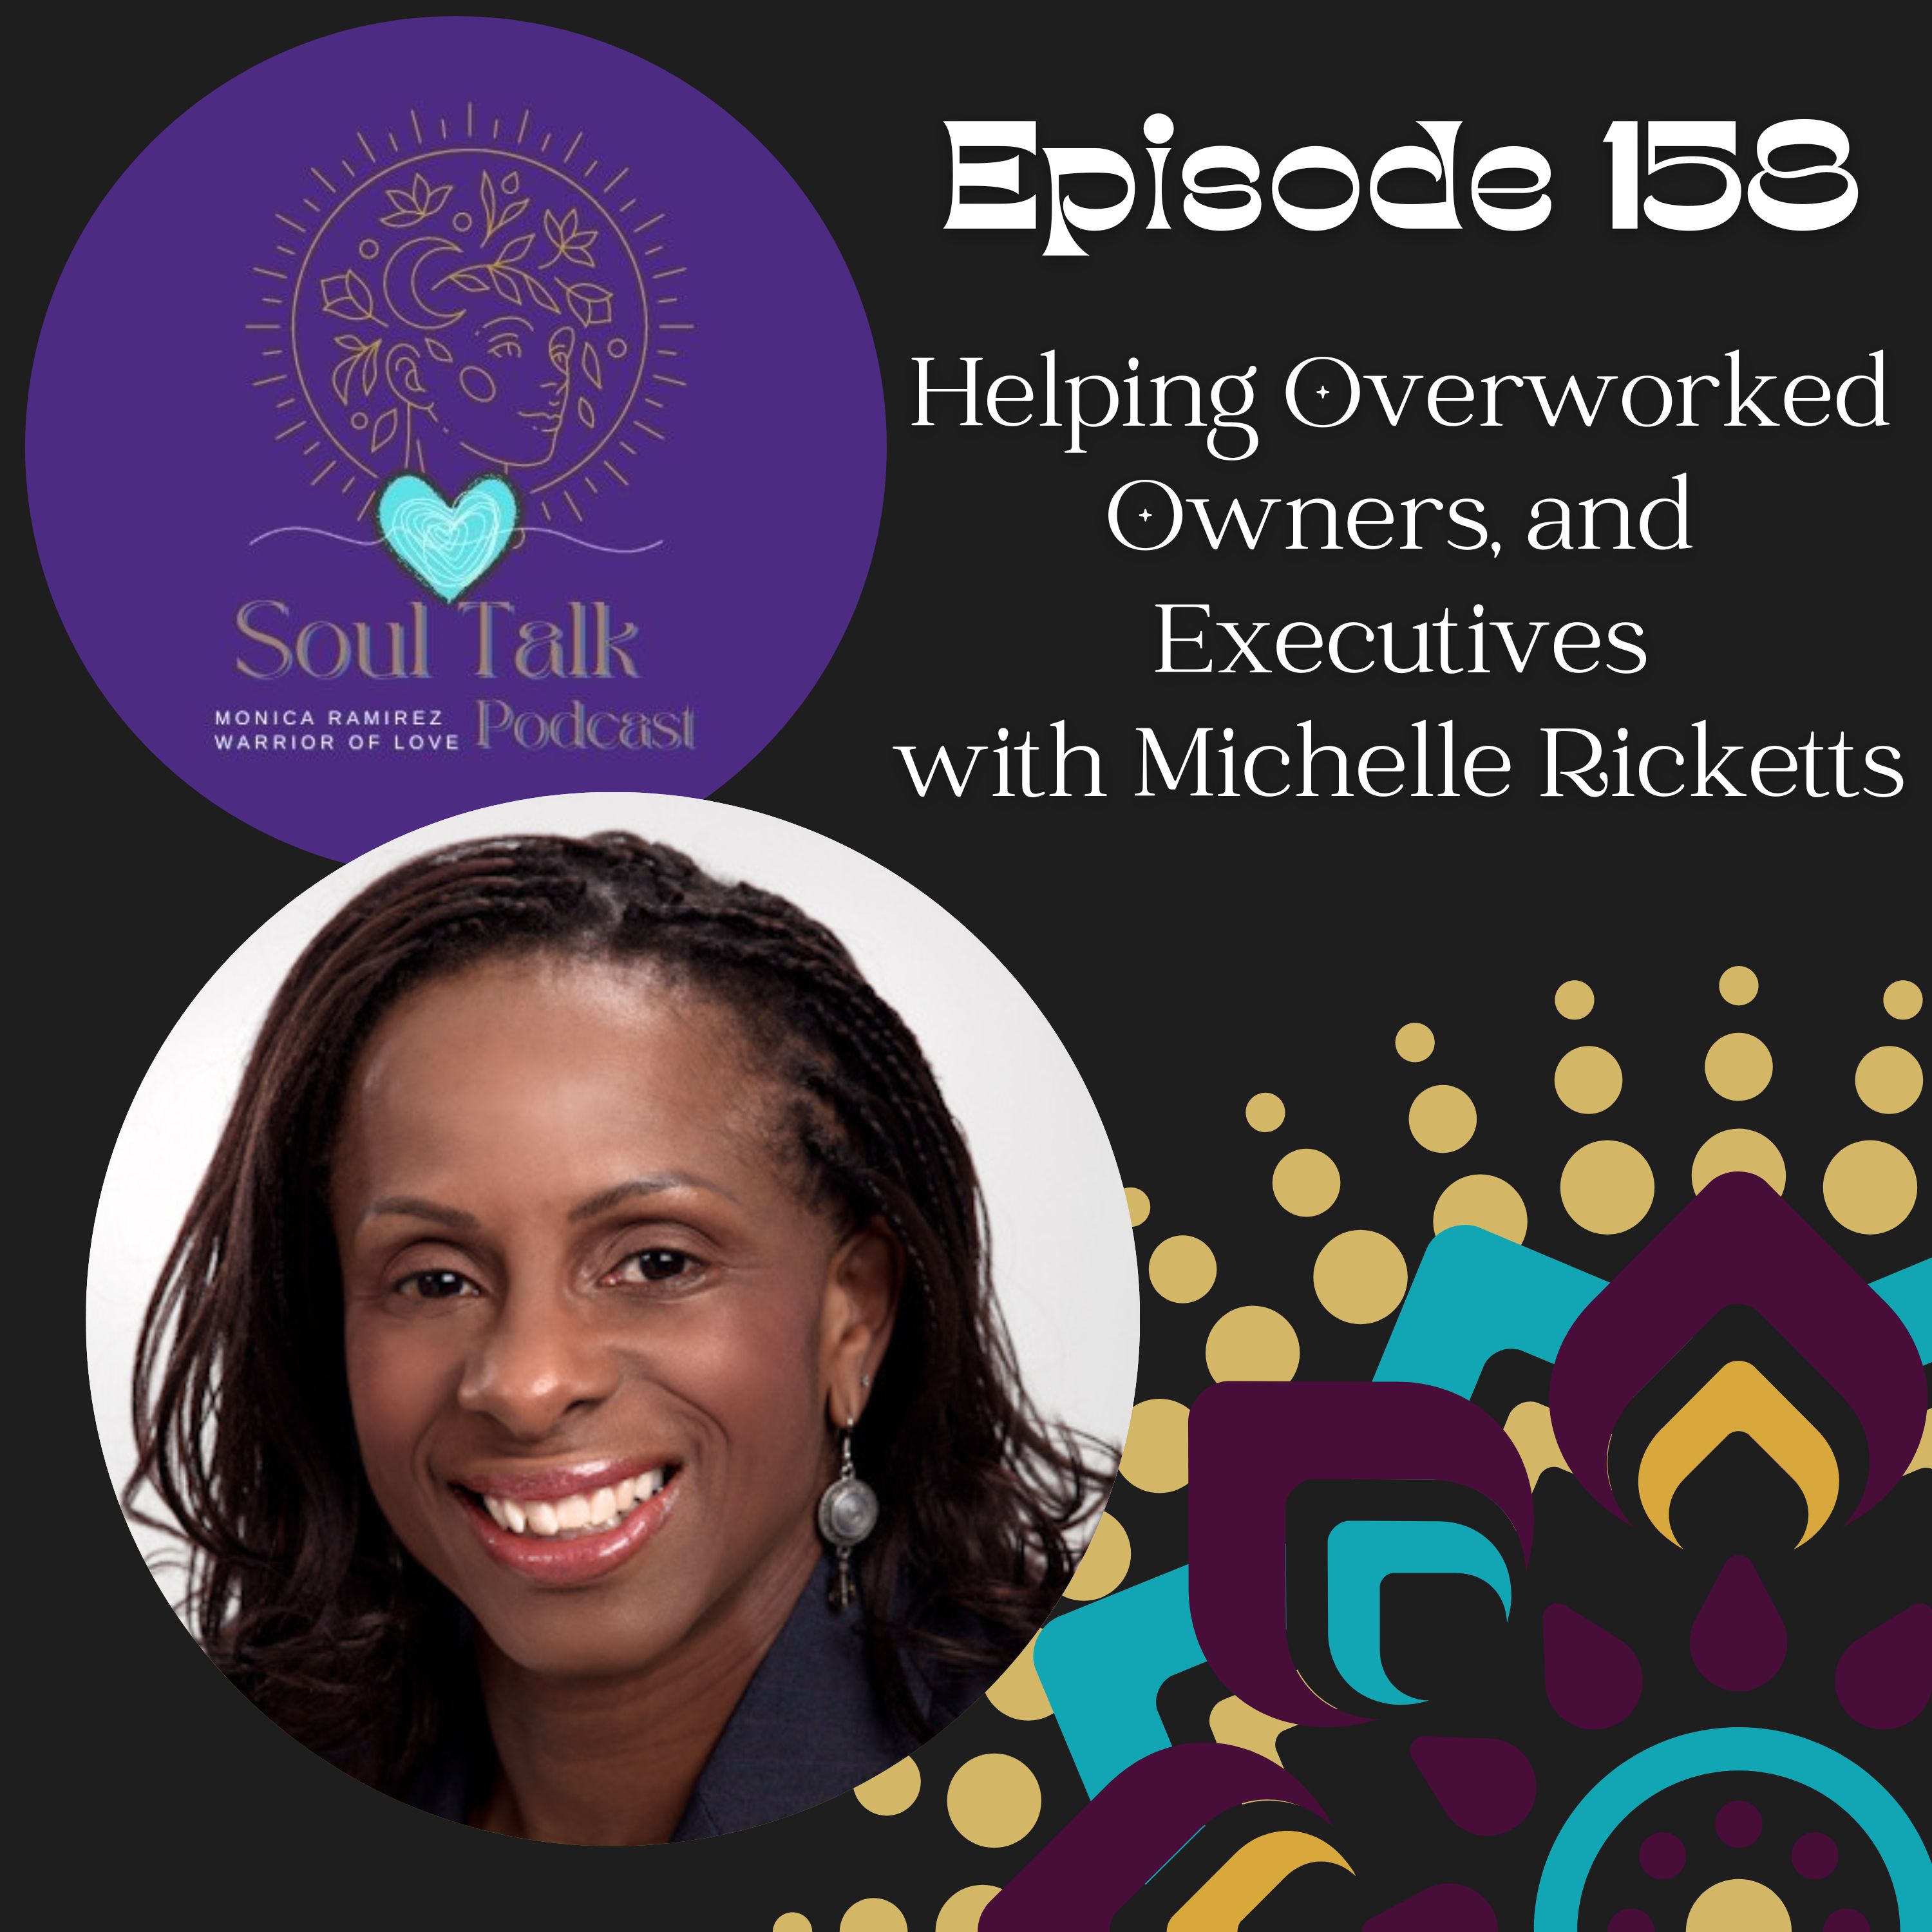 The Soul Talk Episode 158: Helping Overworked Owners, and Executives